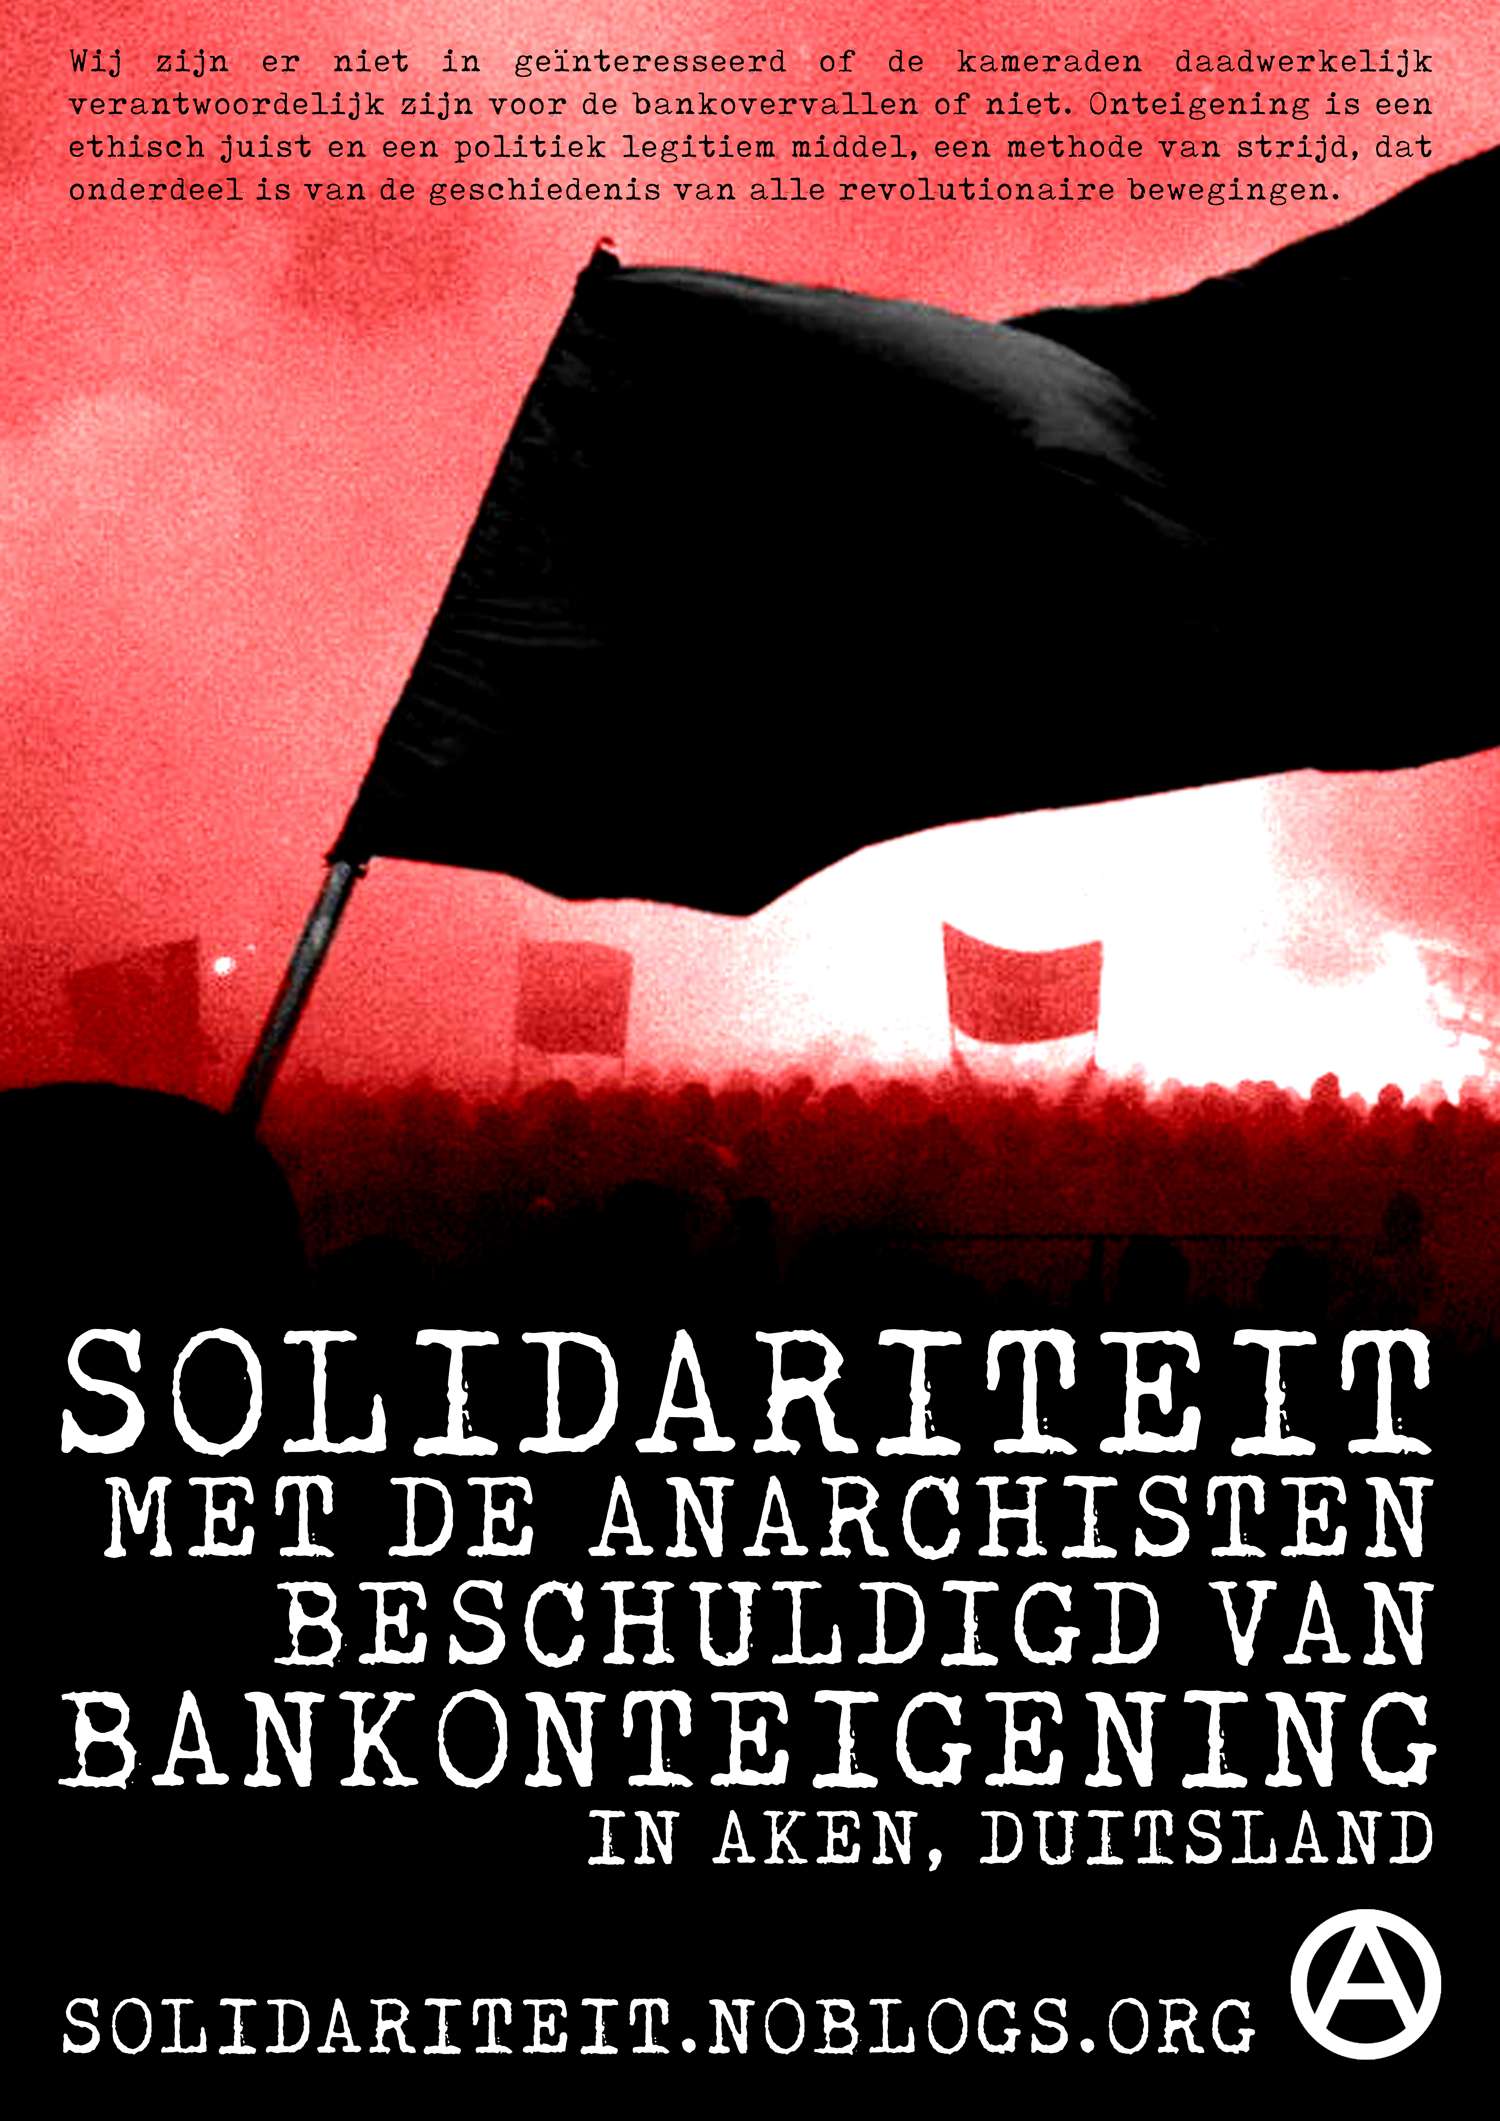 The Hague, Netherlands: ATM machines demolished in solidarity with comrades